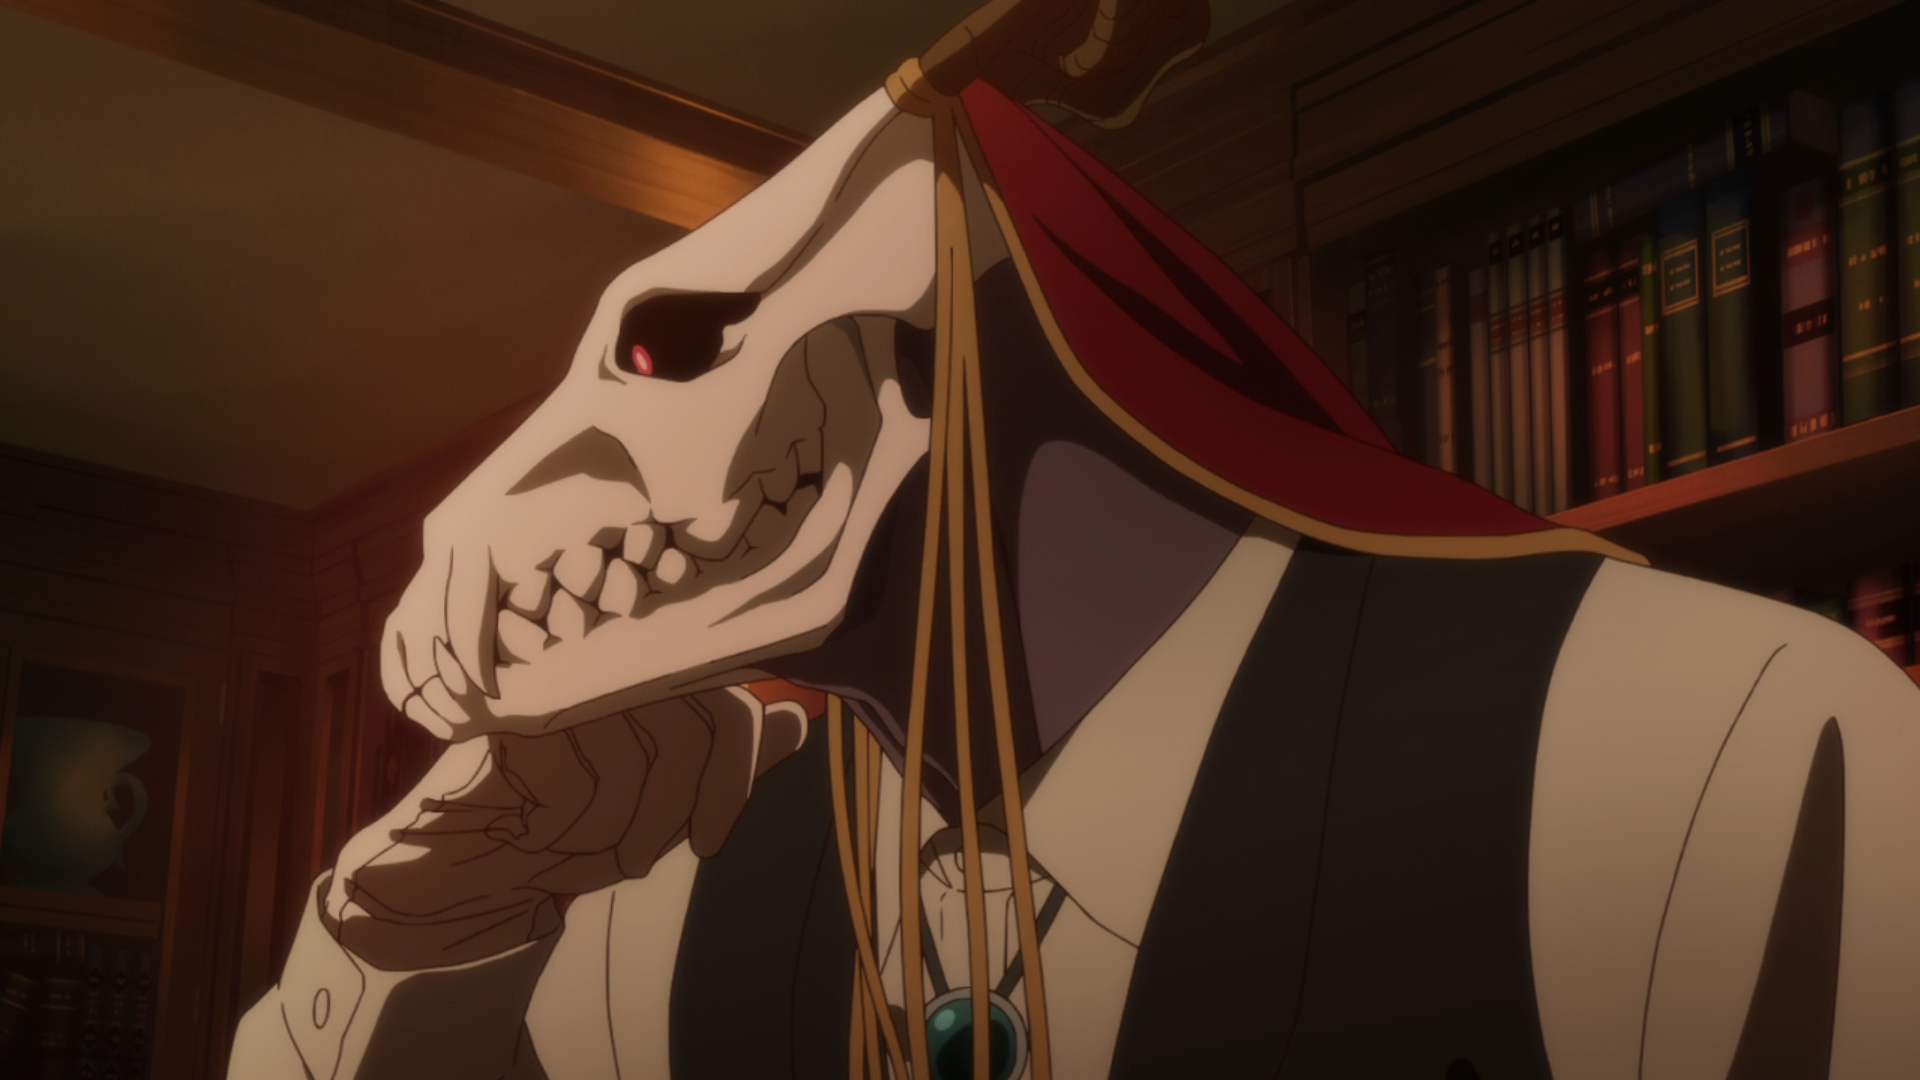 Anime The Ancient Magus' Bride HD Wallpaper | Background Image